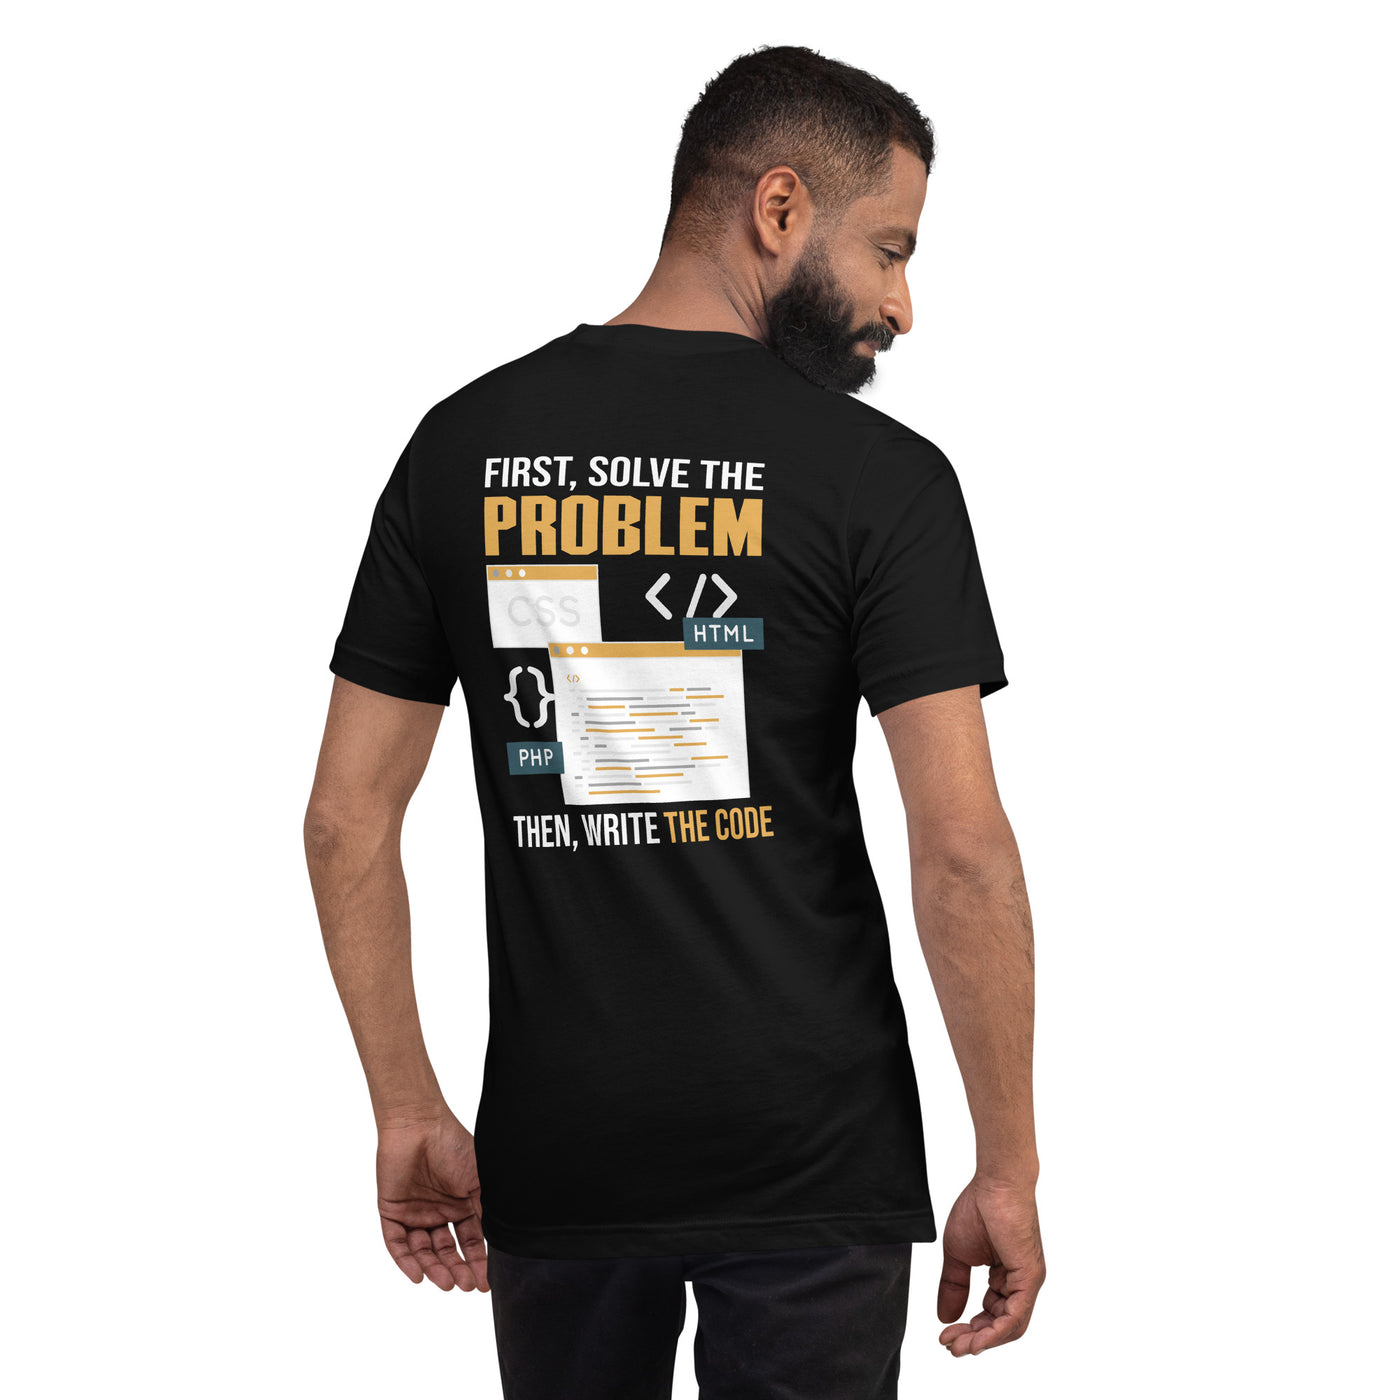 First, Solve the problem; then, Write the code V2 - Unisex t-shirt (back print)